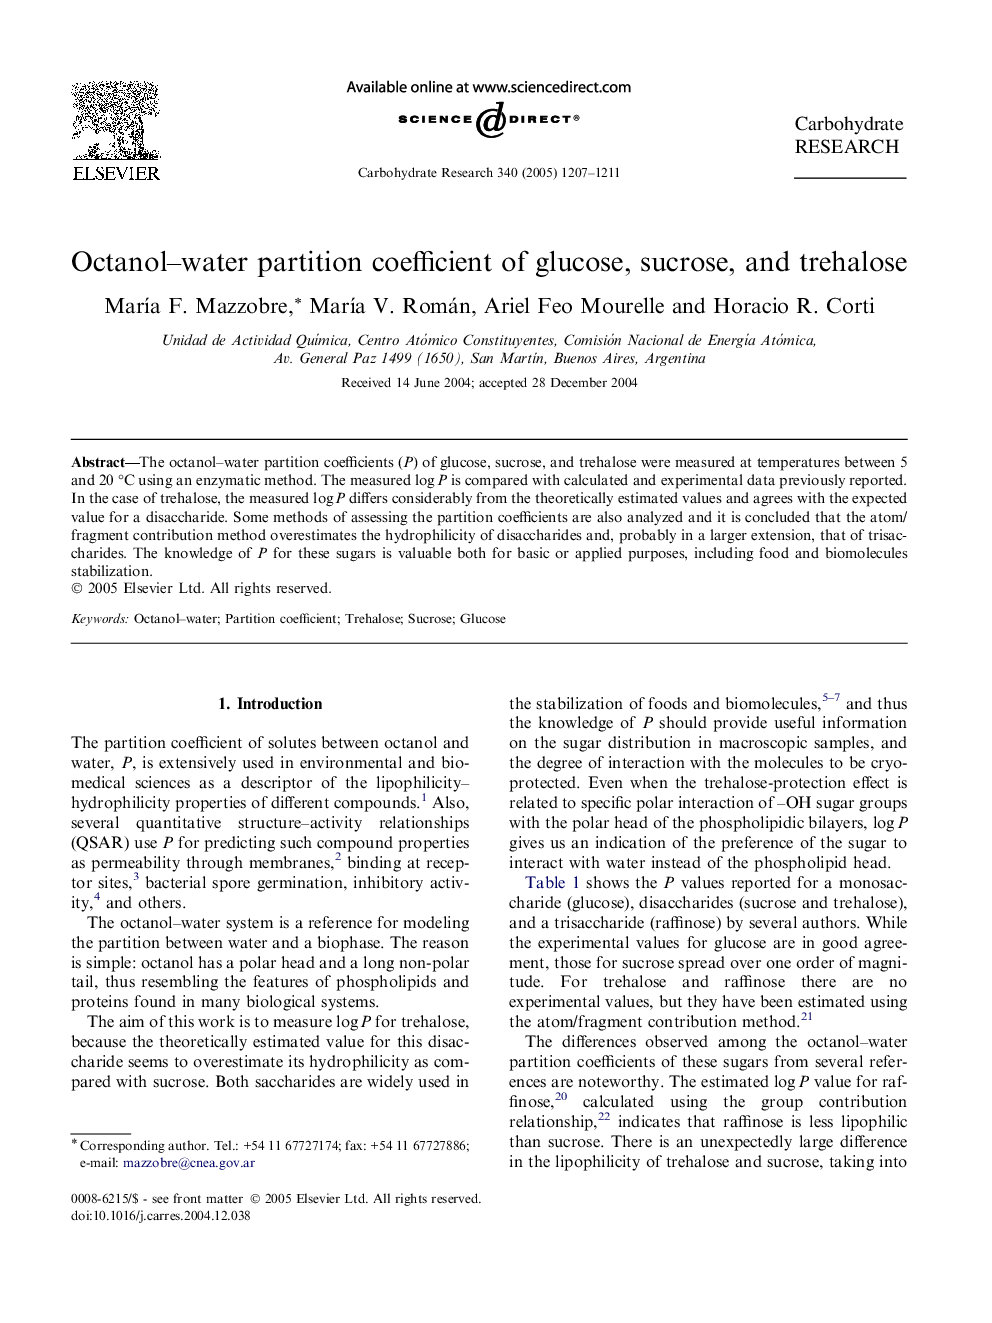 Octanol-water partition coefficient of glucose, sucrose, and trehalose